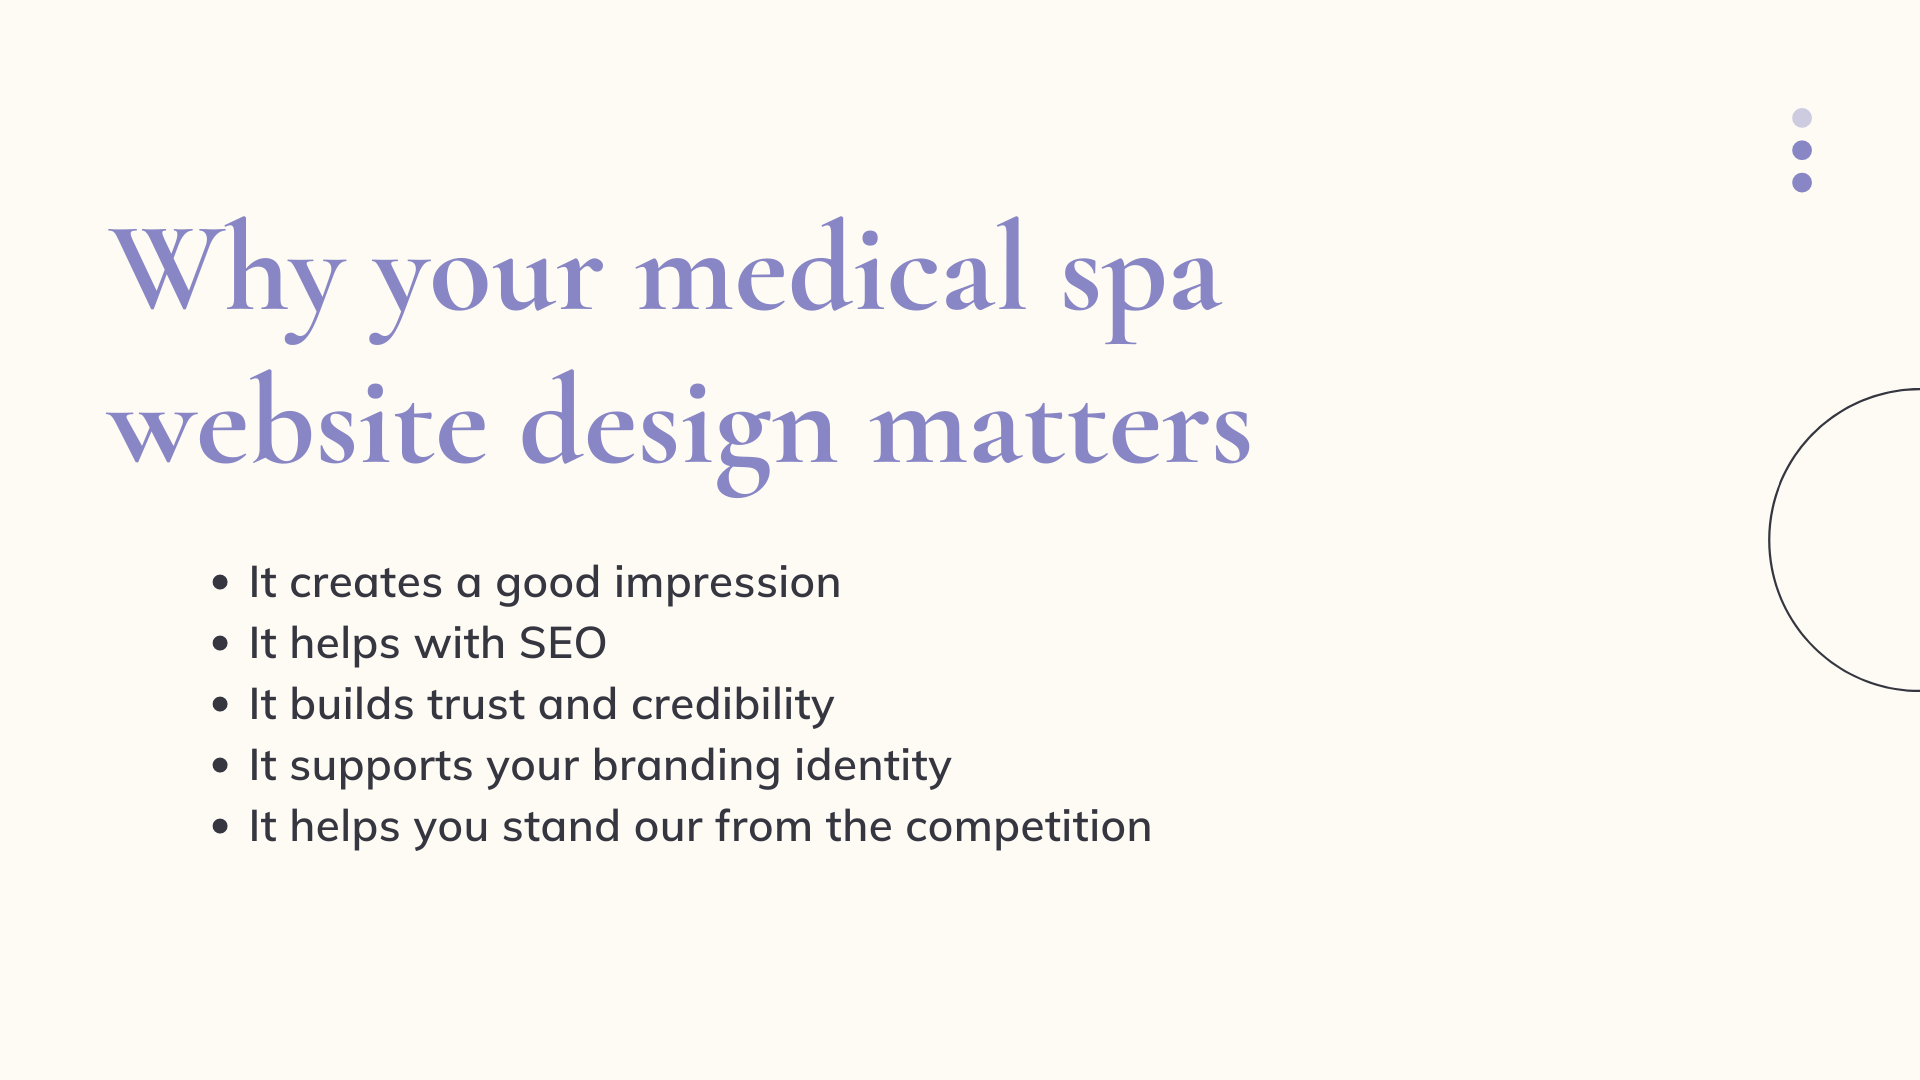 Why Your Medical Spa Website Design Matters